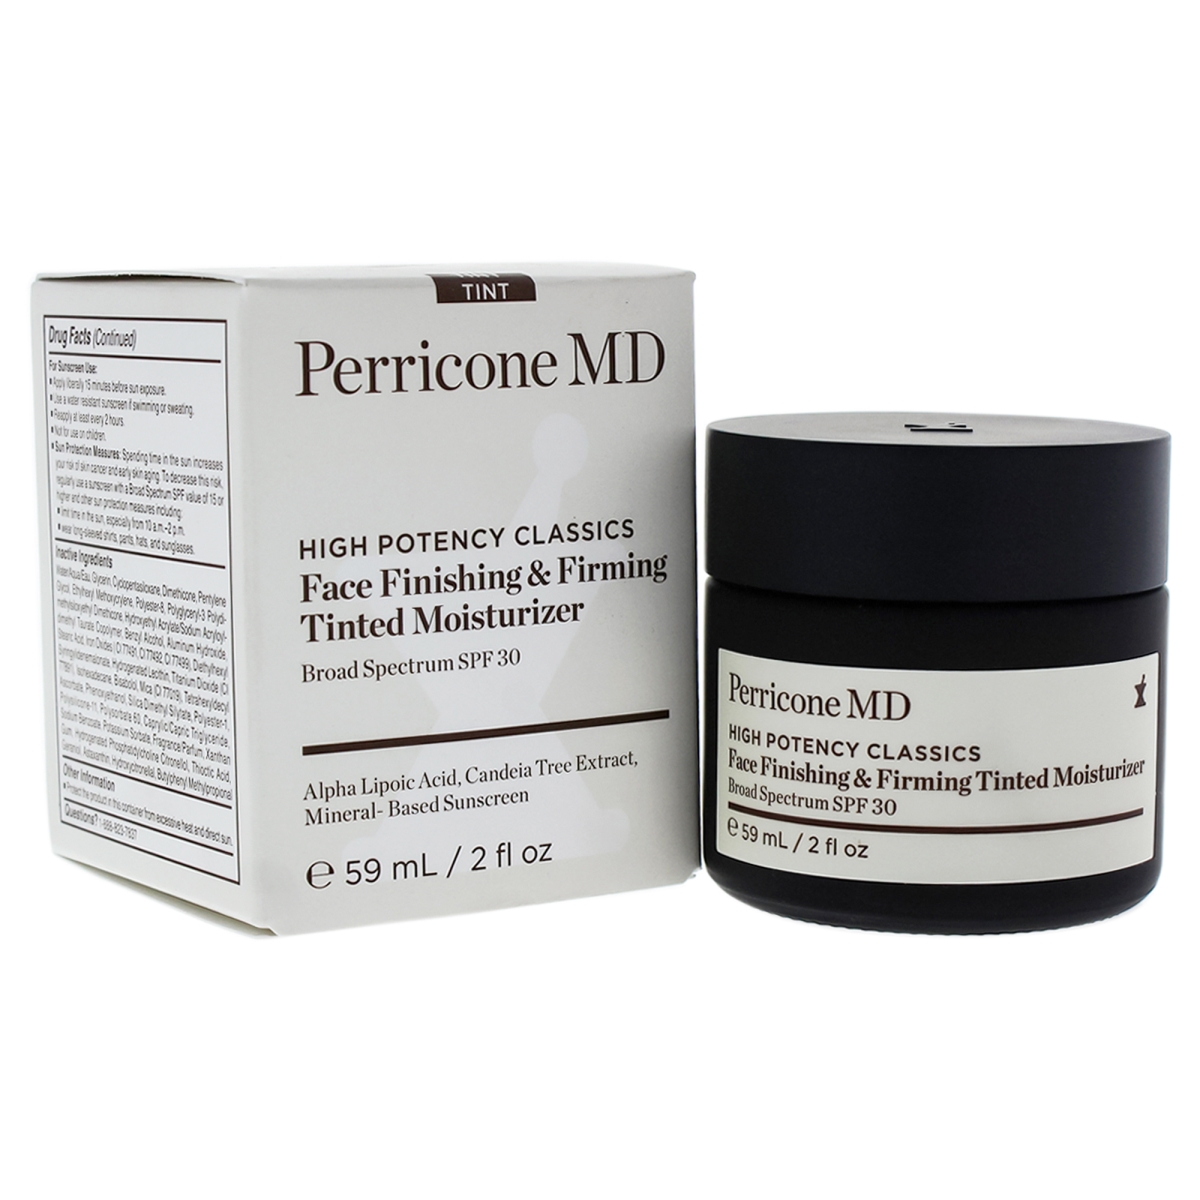 Picture of Perricone MD I0087941 High Potency Classics Face Finishing & Firming Tinted Moisturizer SPF 30 for Unisex - 2 oz